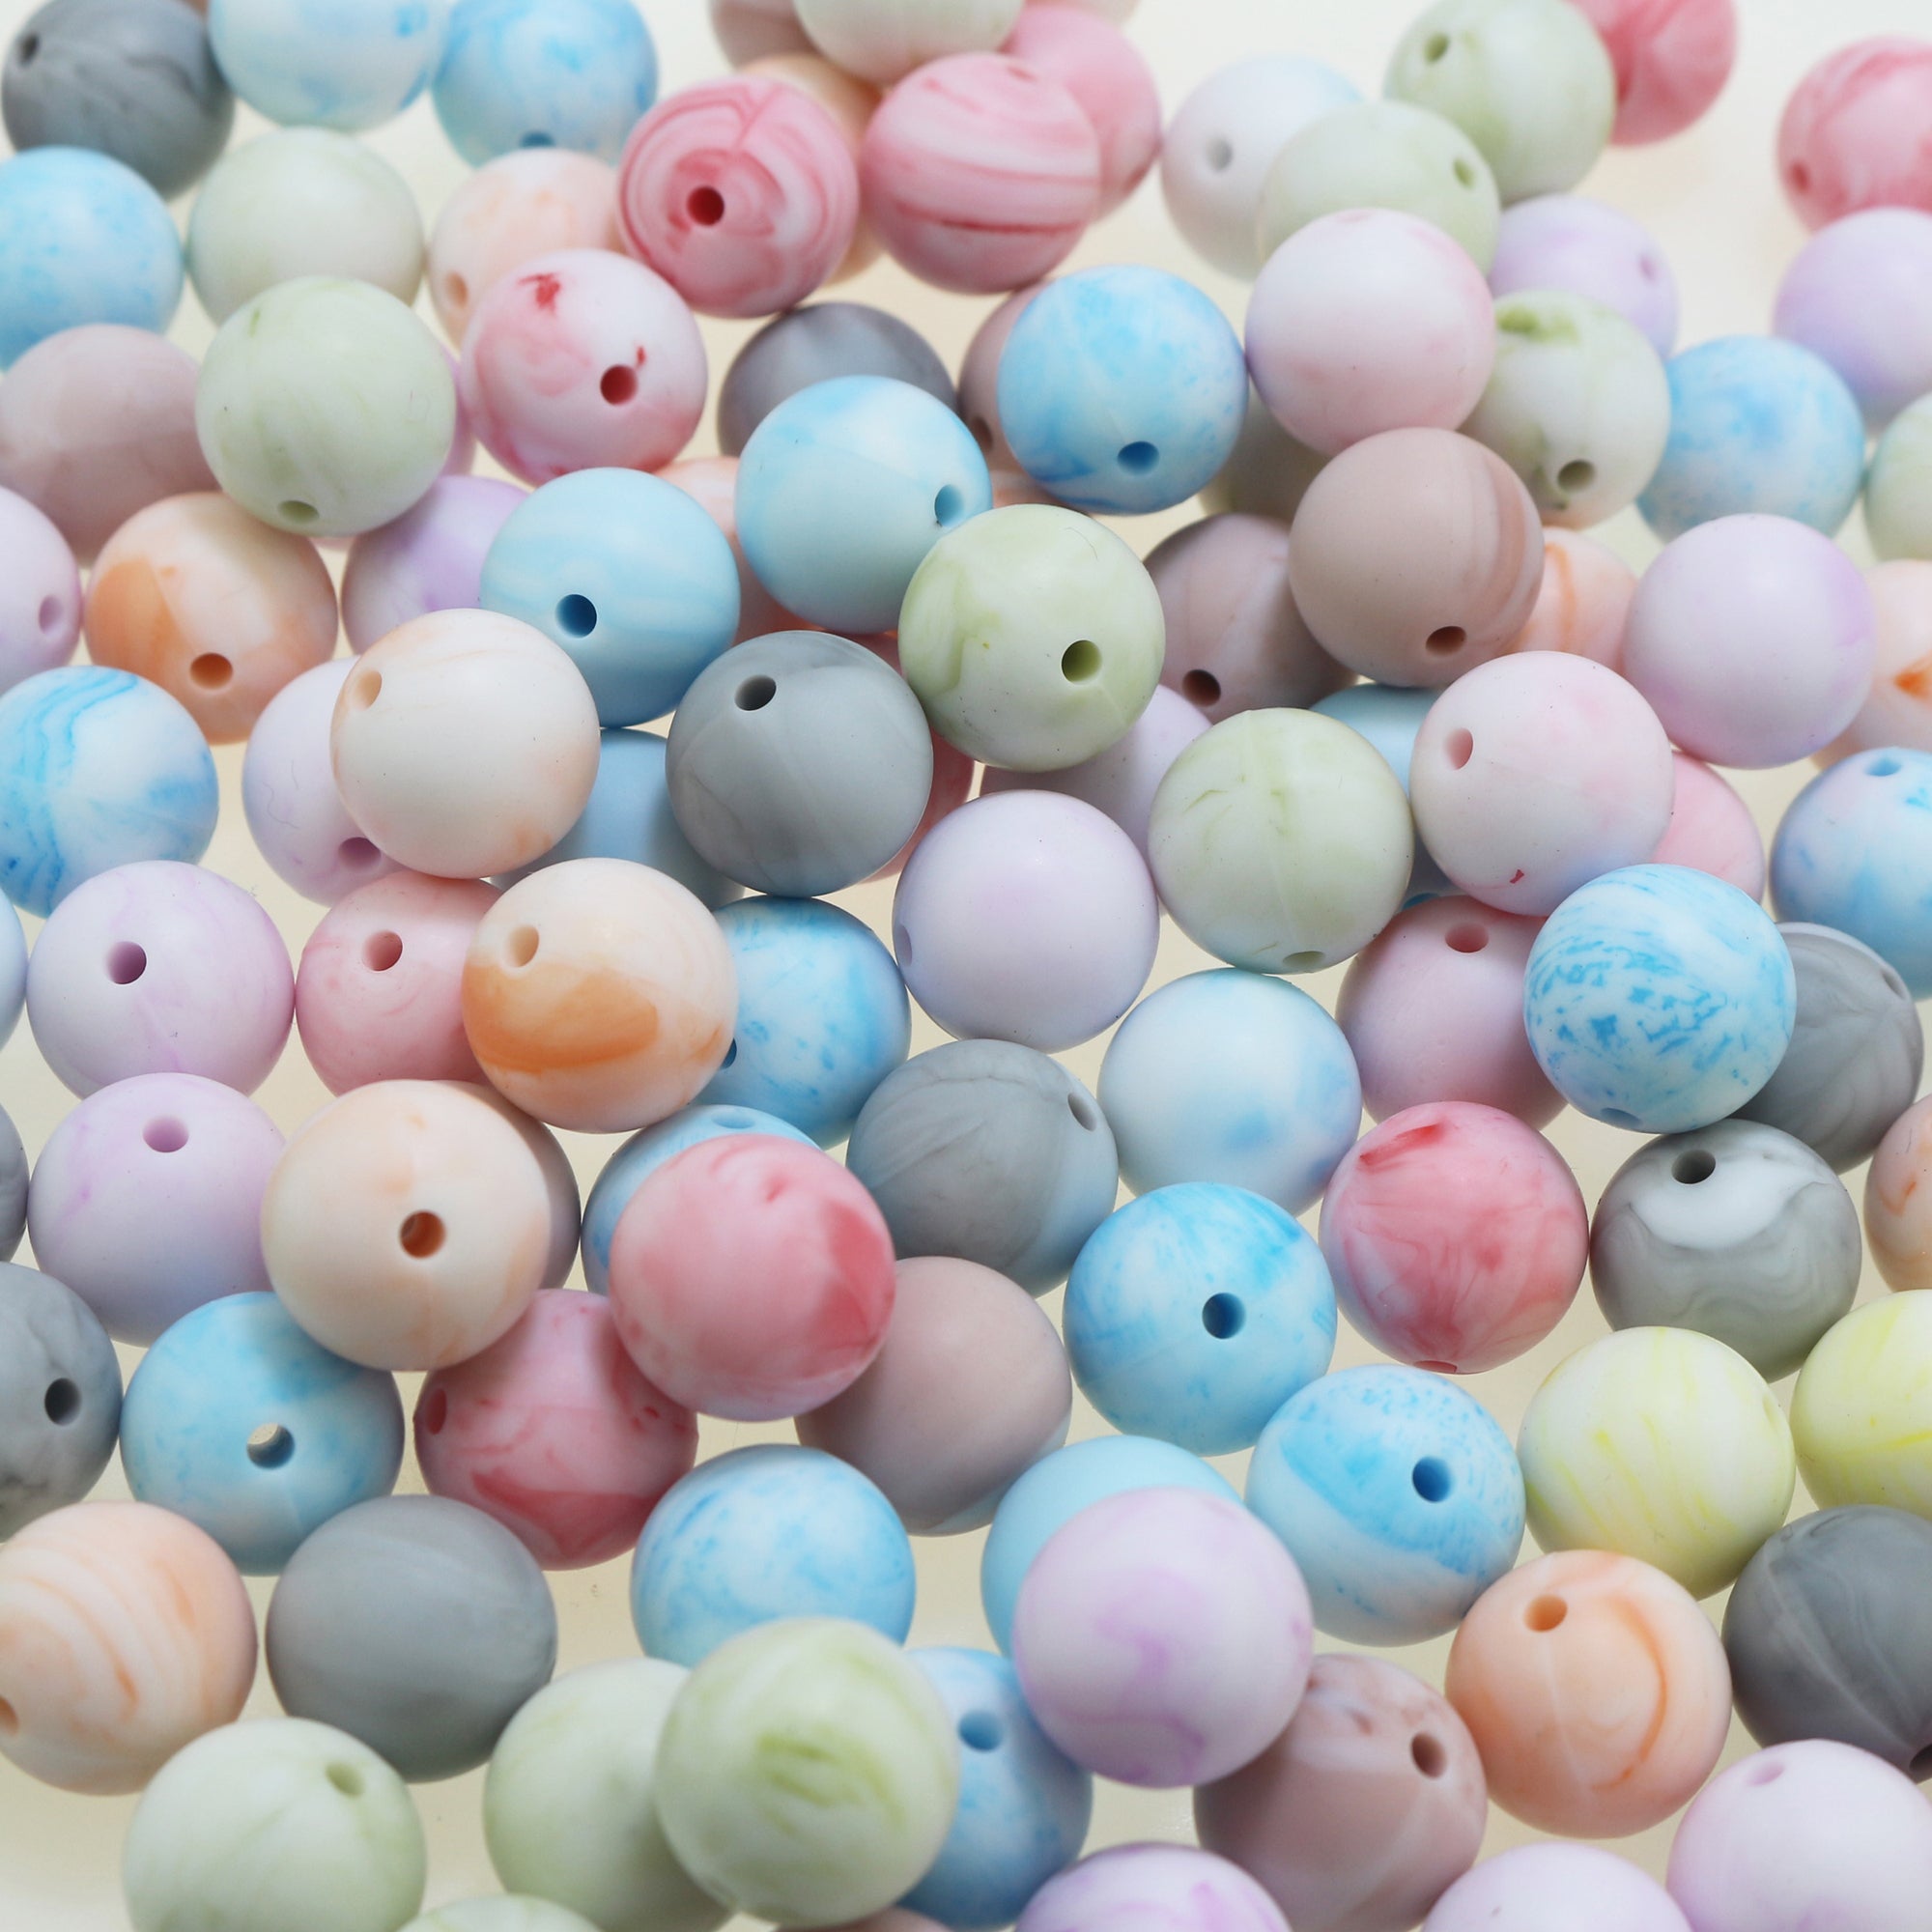 12mm/15mm Mixed Silicone Beads, Round Silicone Bead, Heart Print Silicone  Beads, Craft Silicone Beads, Bulk Loose Beads, Wholesale Beads 